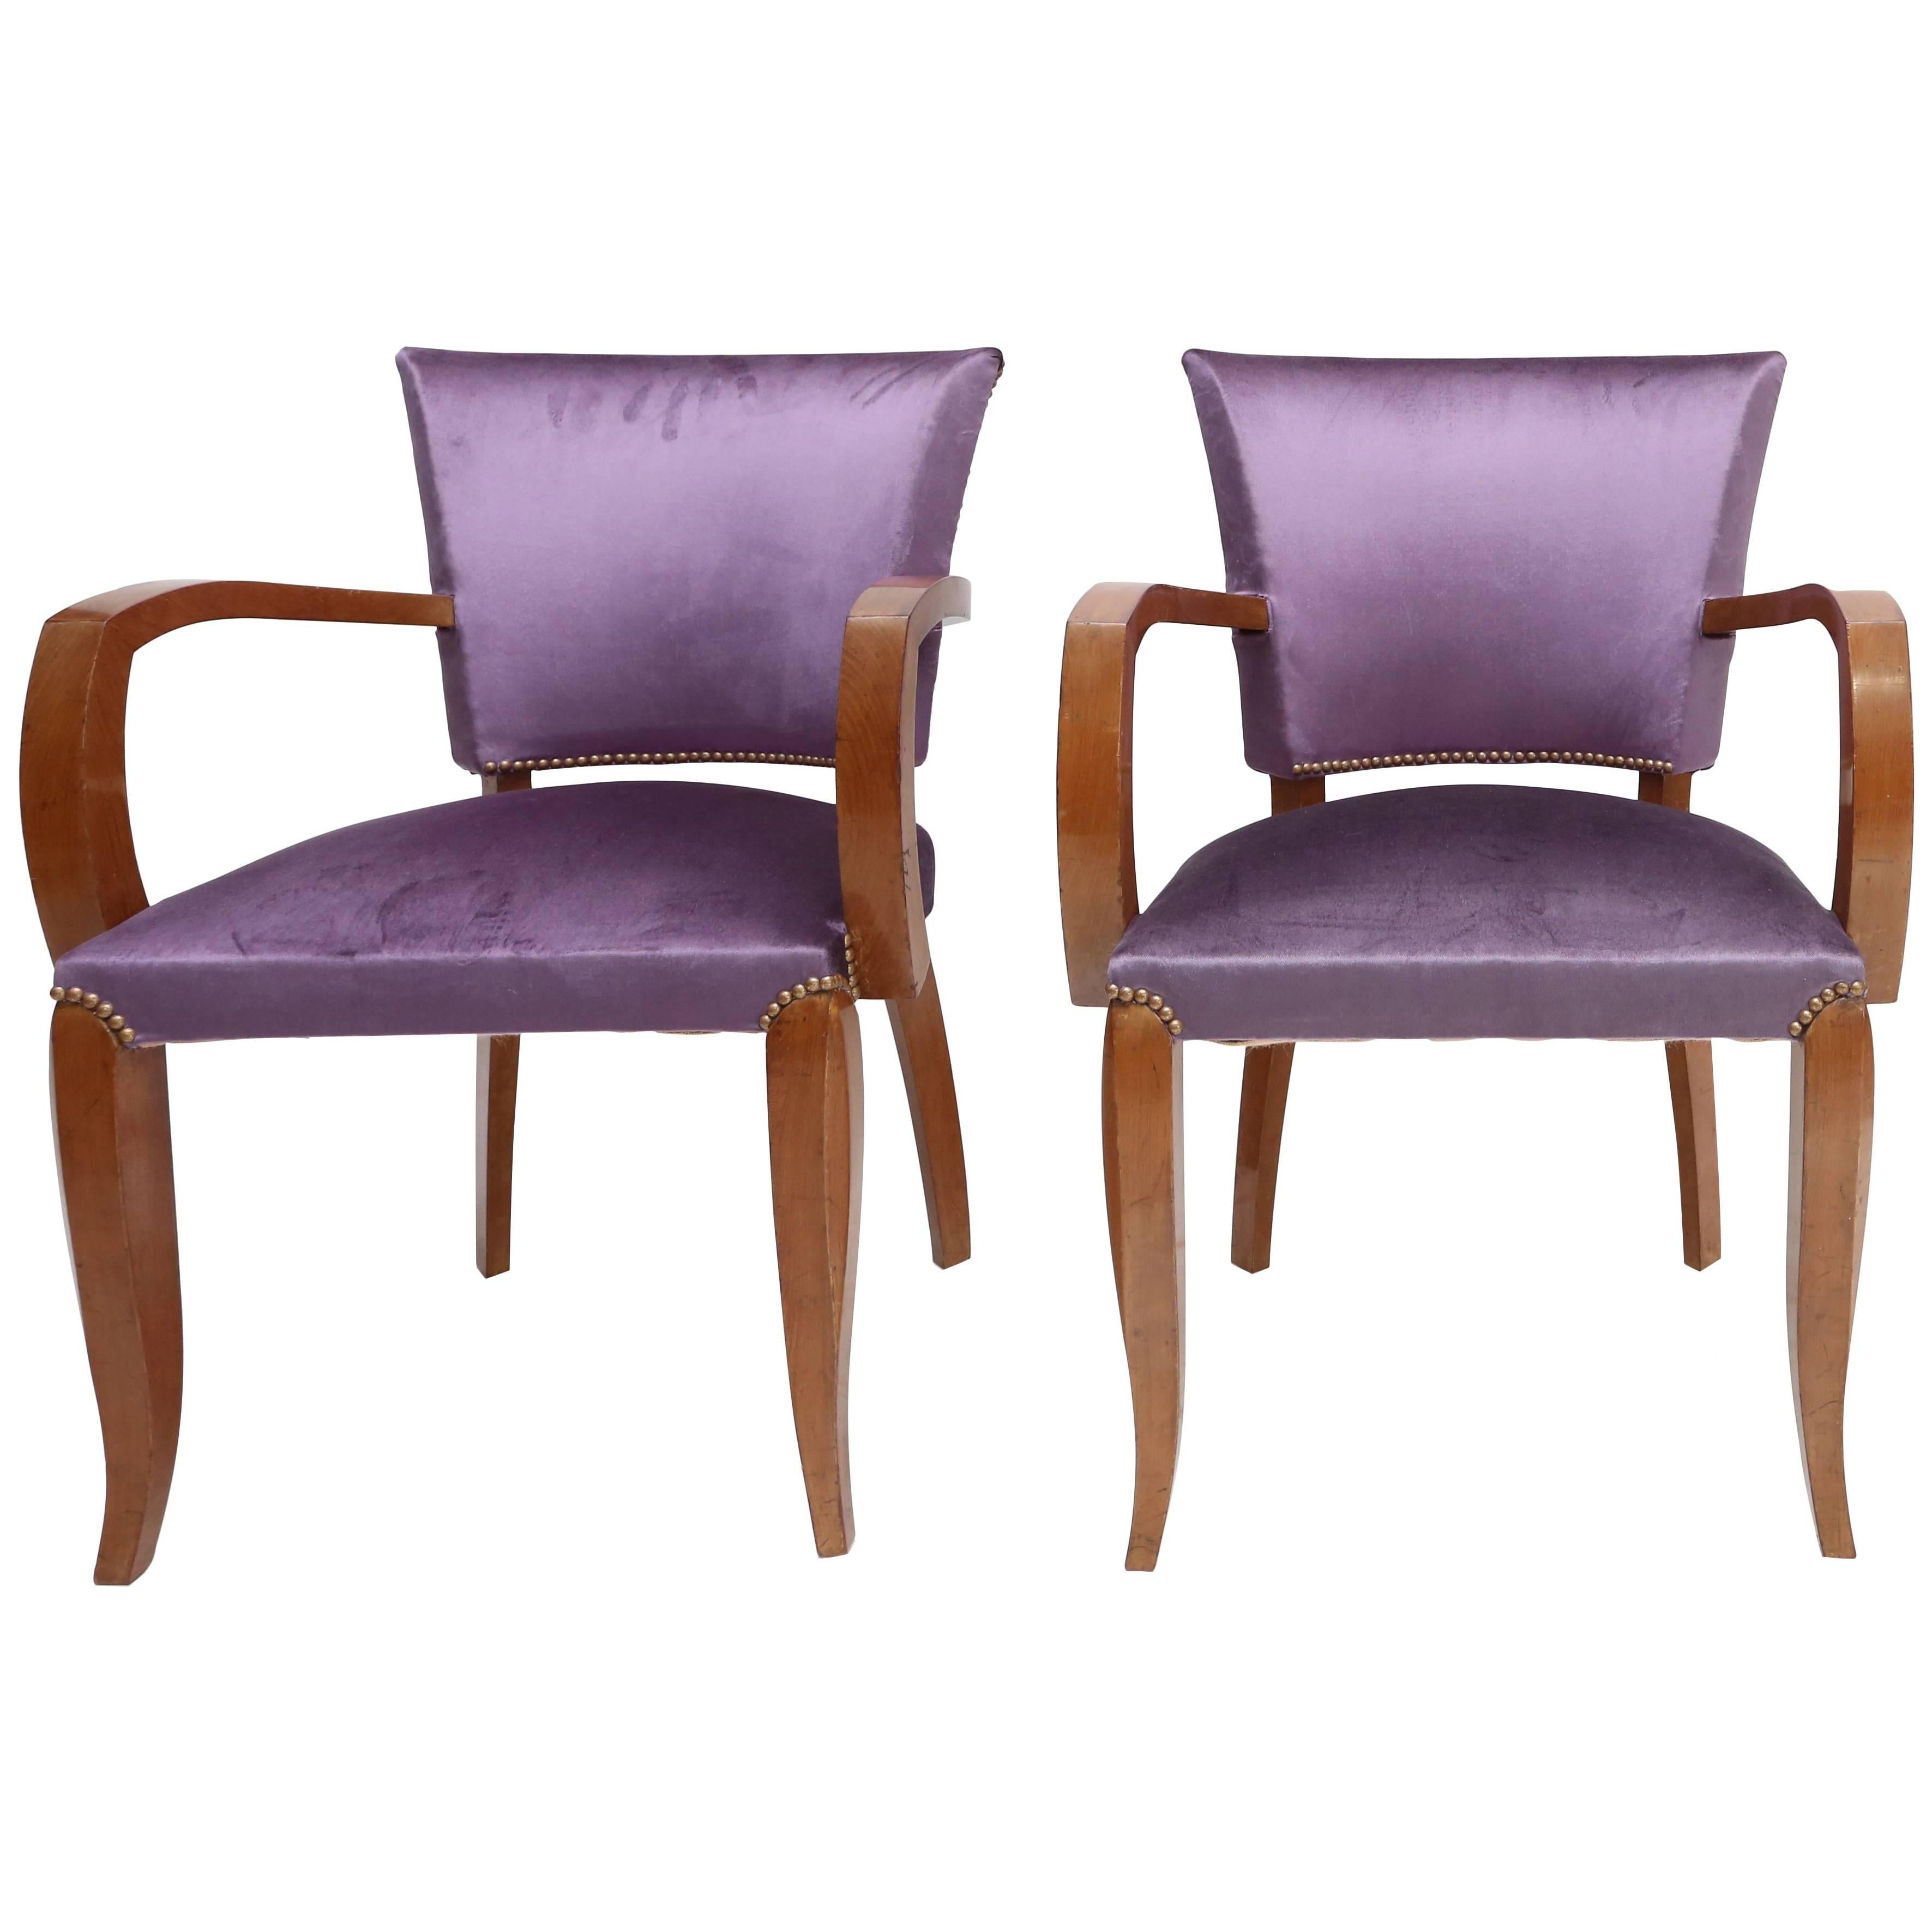 Art Deco armchairs, style Jules Leleu, France, 1940s
A solid mahogany frame and lilac velvet upholstery make these a perfect set to be used at a desk or as corner table chairs
would fit well in a Jean-Charles Moreux, Ruhlmann, Arbus or Jean Royere